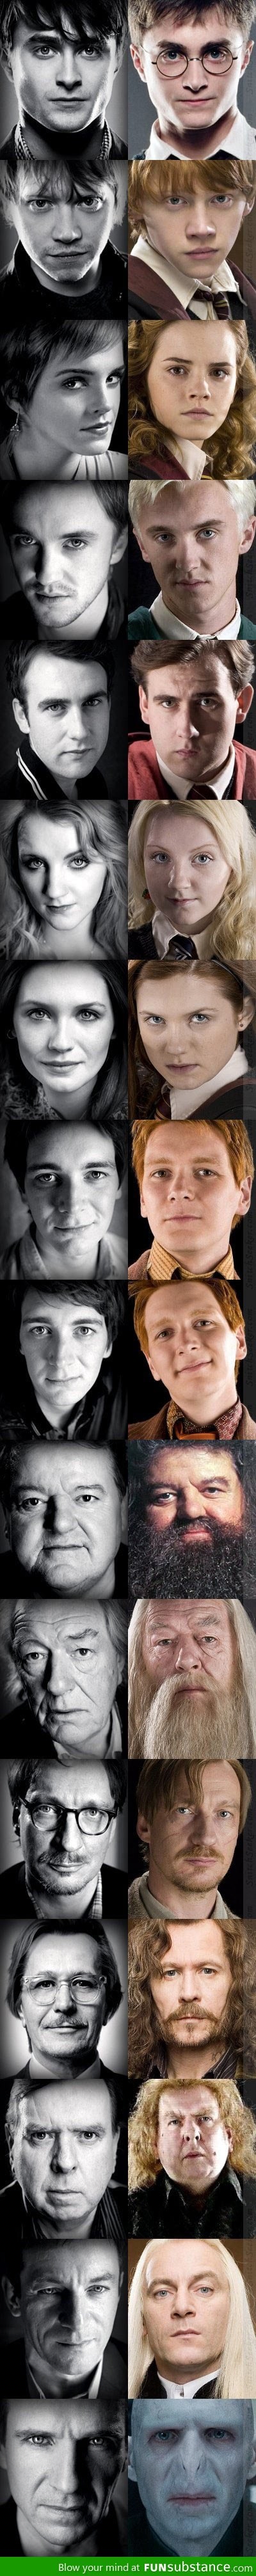 The real faces behind Harry Potter characters